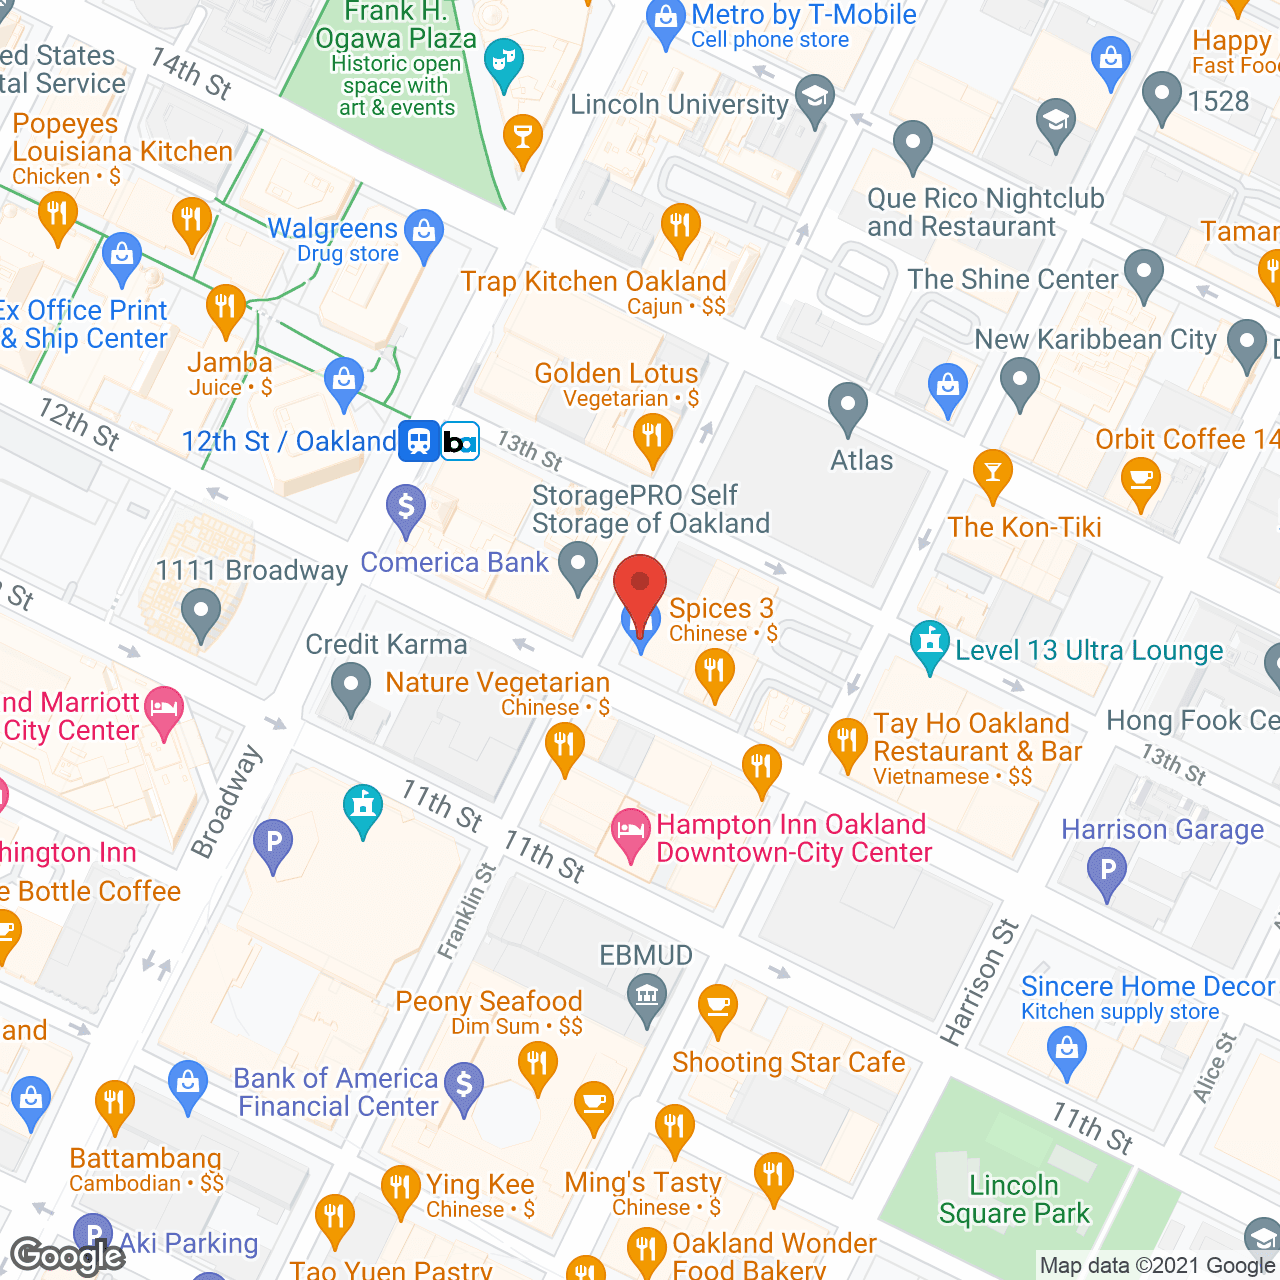 St Mark's Apartments in google map